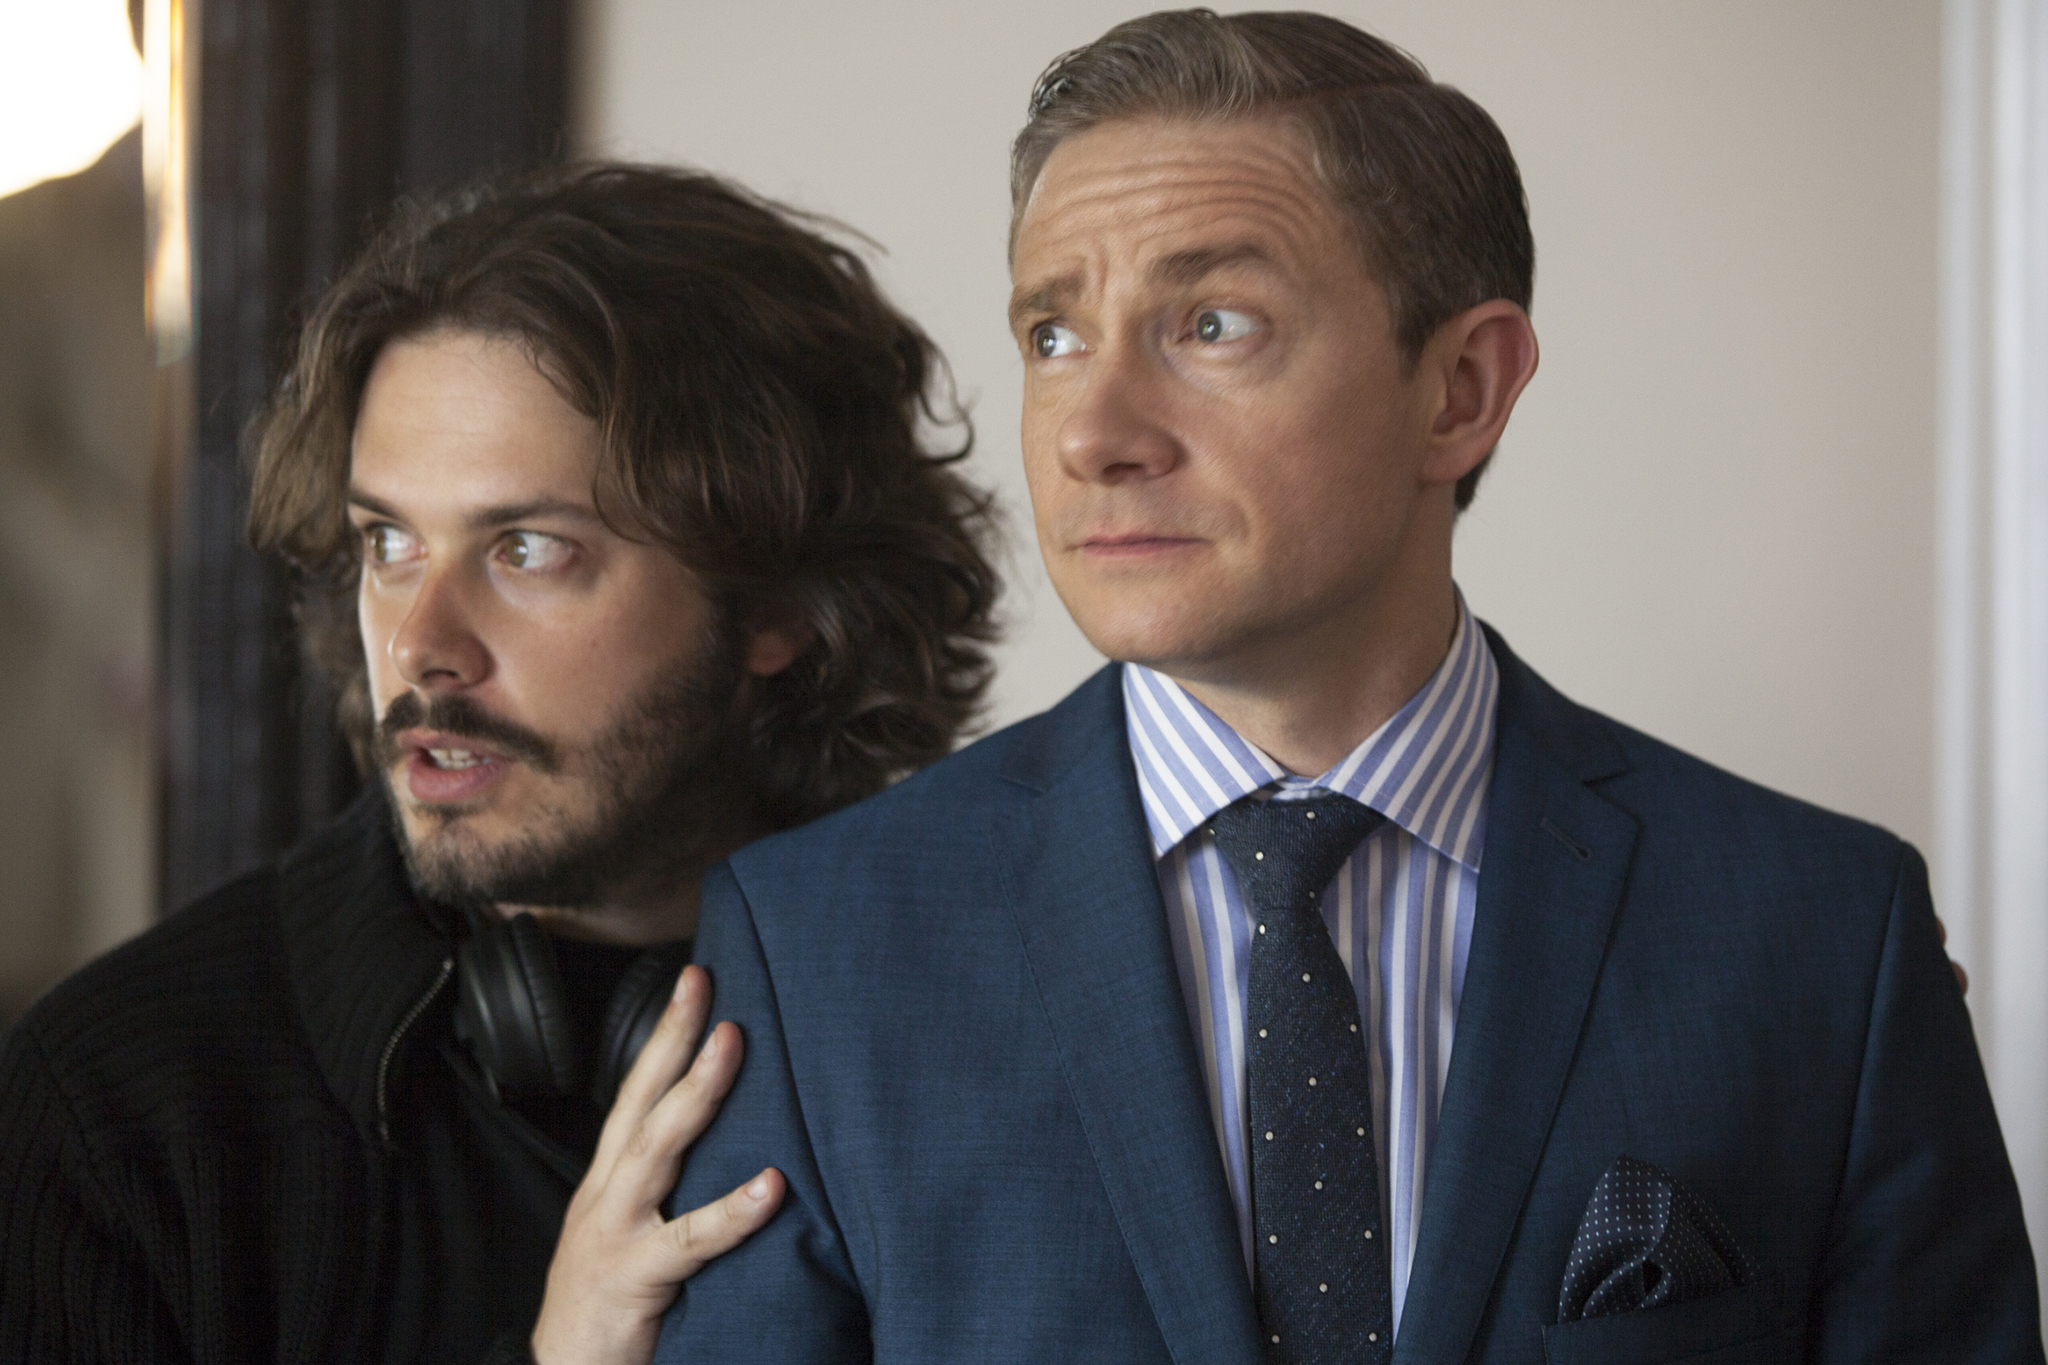 Martin Freeman and Edgar Wright in The World's End (2013)